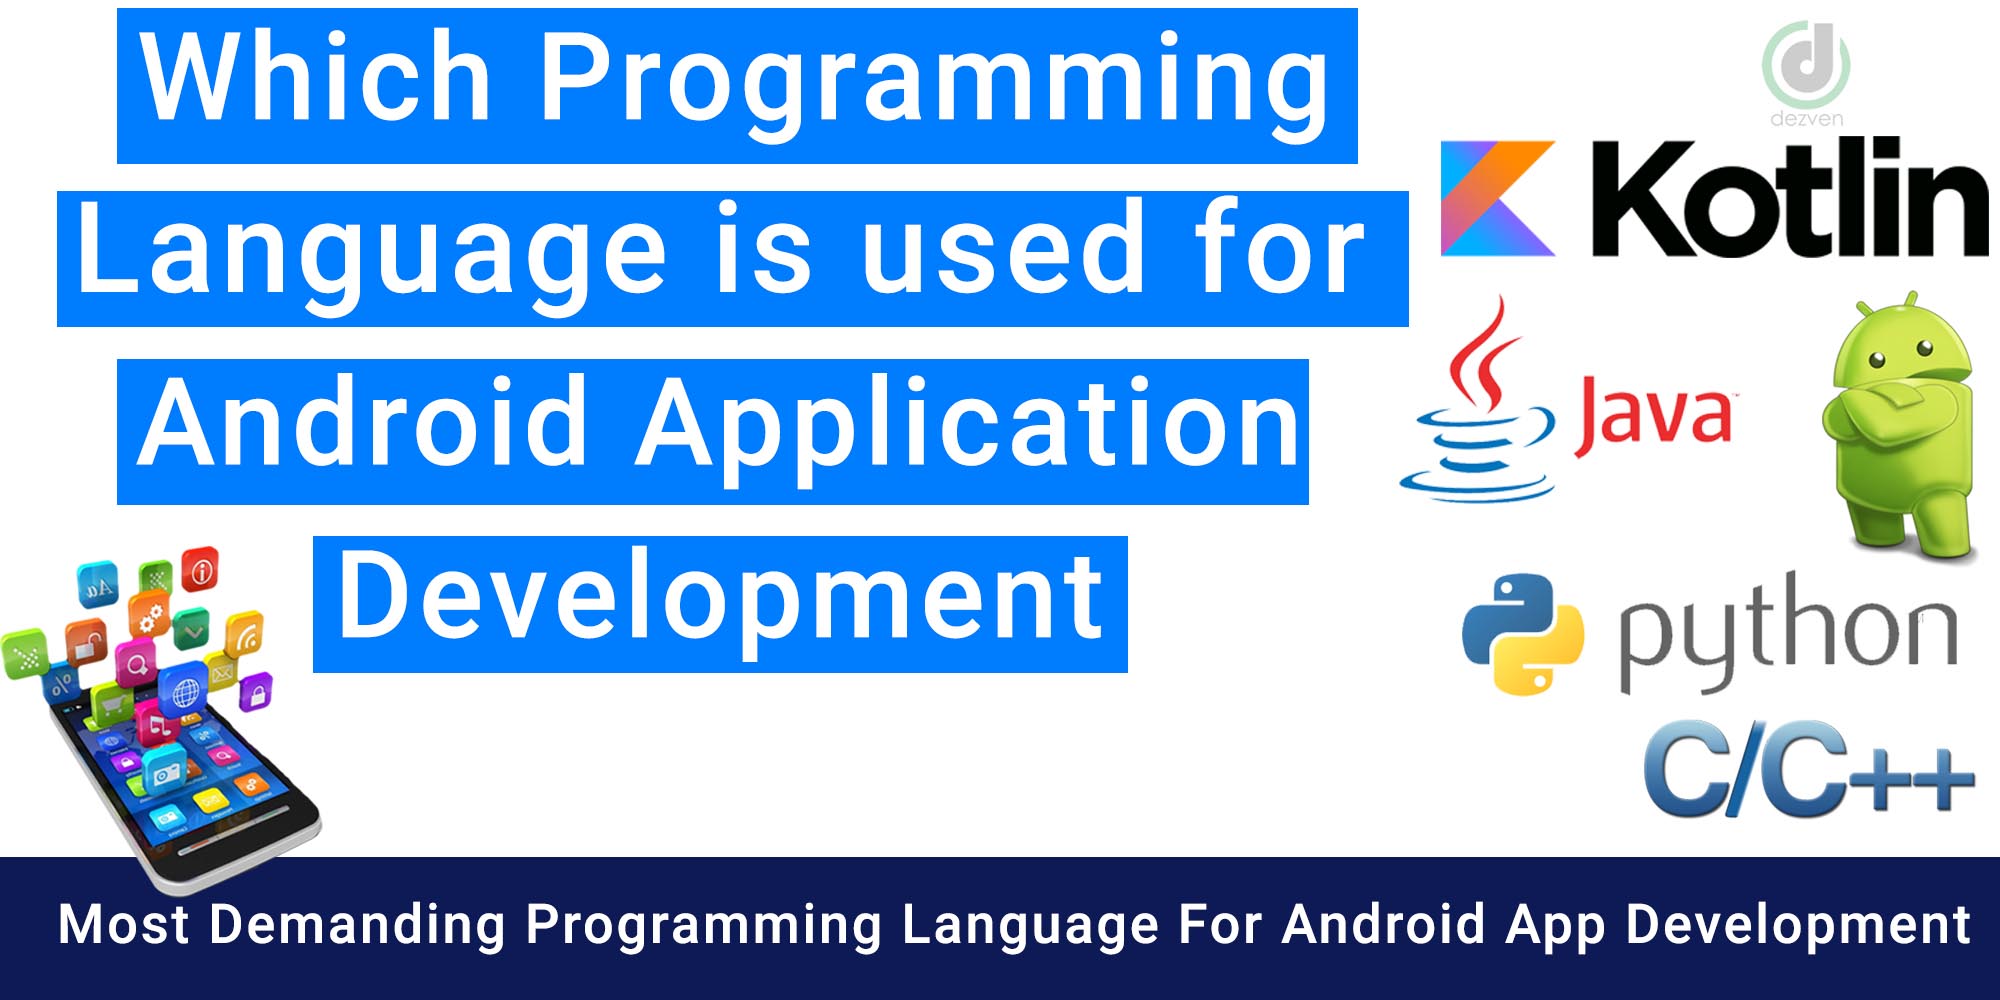 Which Programming Language is used for Android Application Development